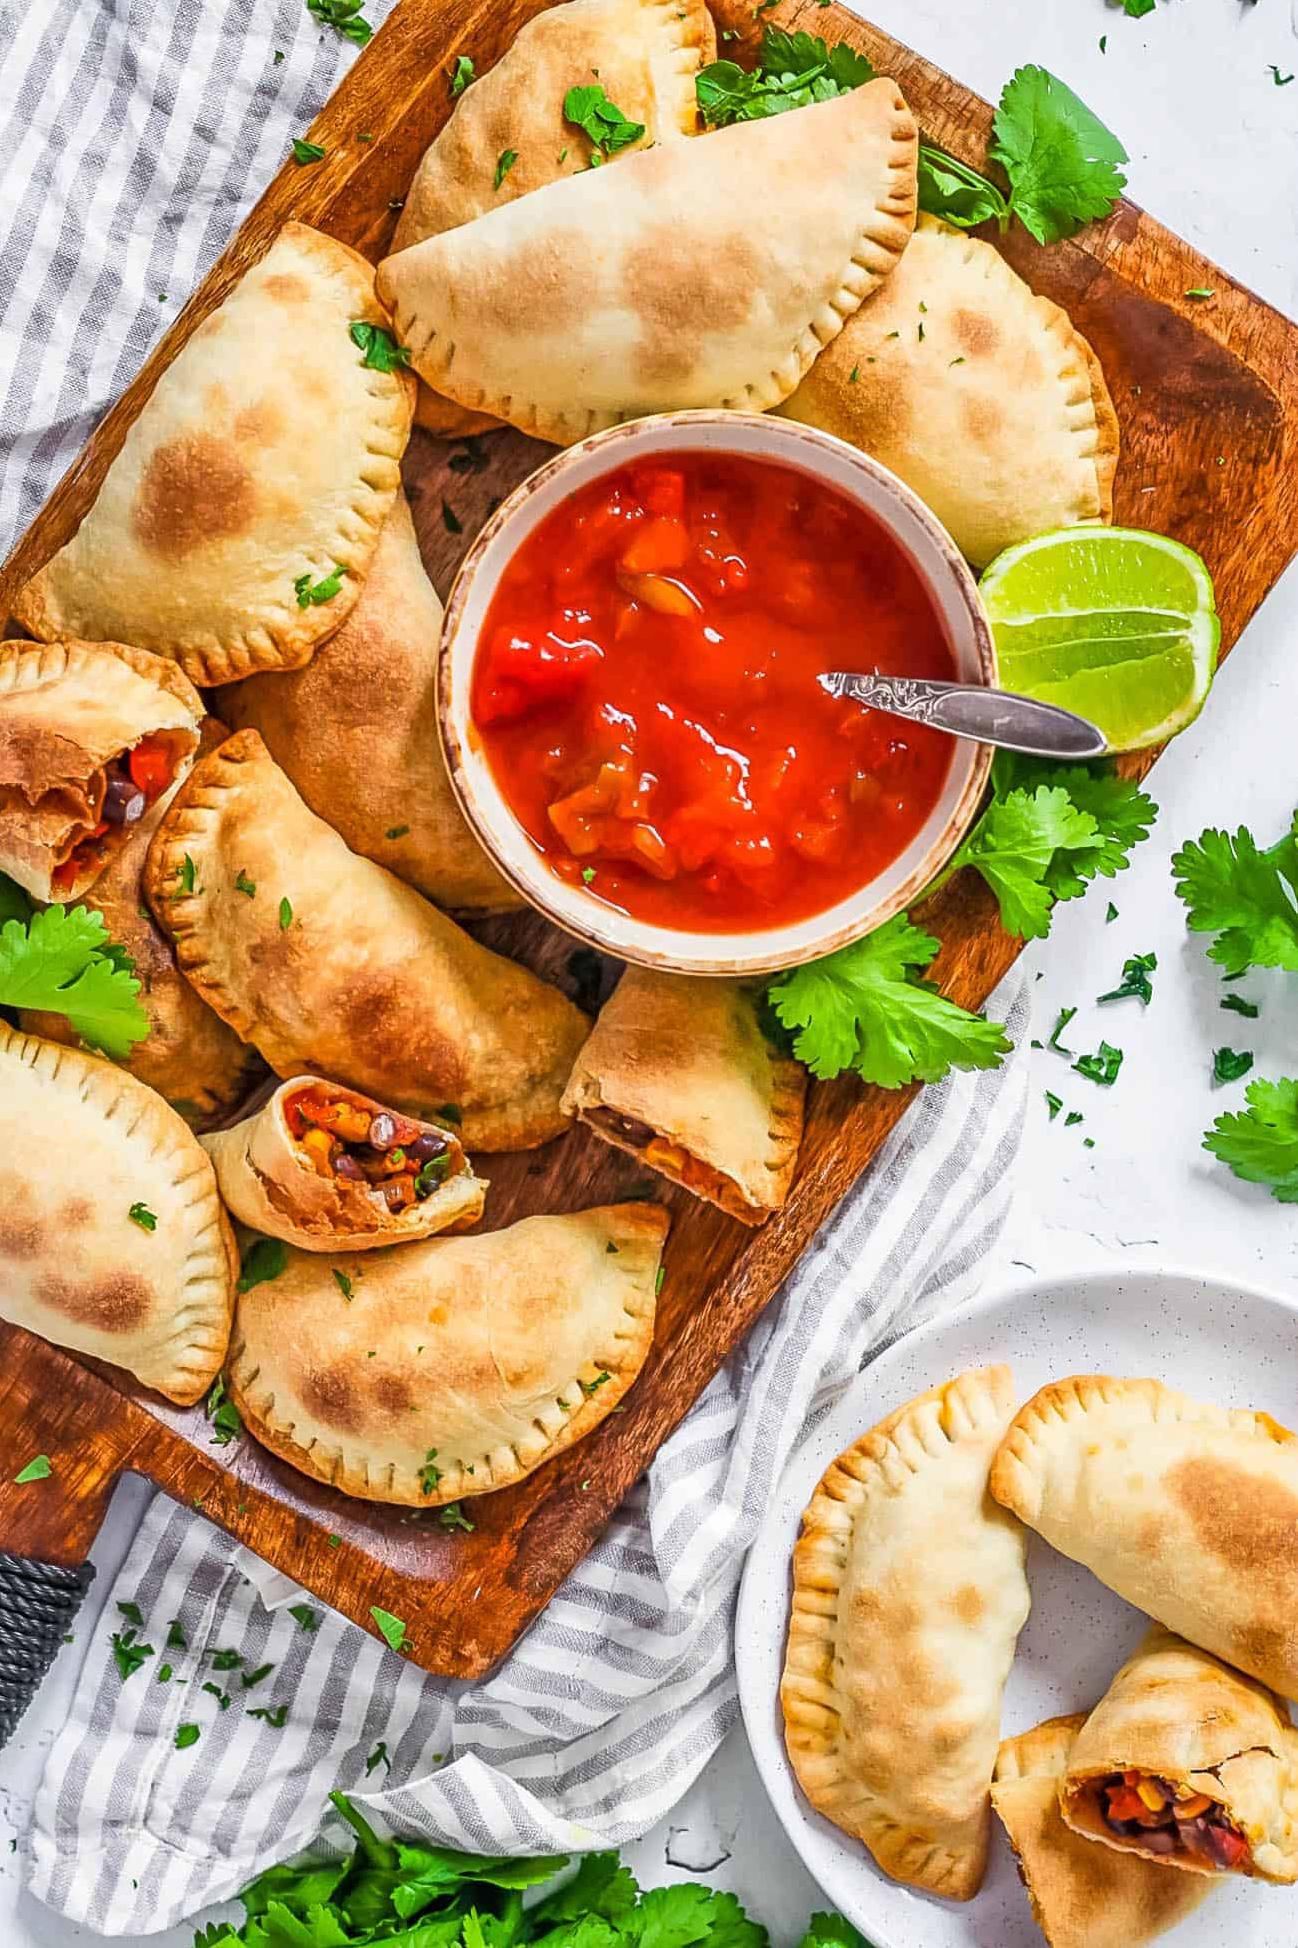  A delicious way to sneak vegetables into your diet, these empanadas are packed with flavorful veggies.